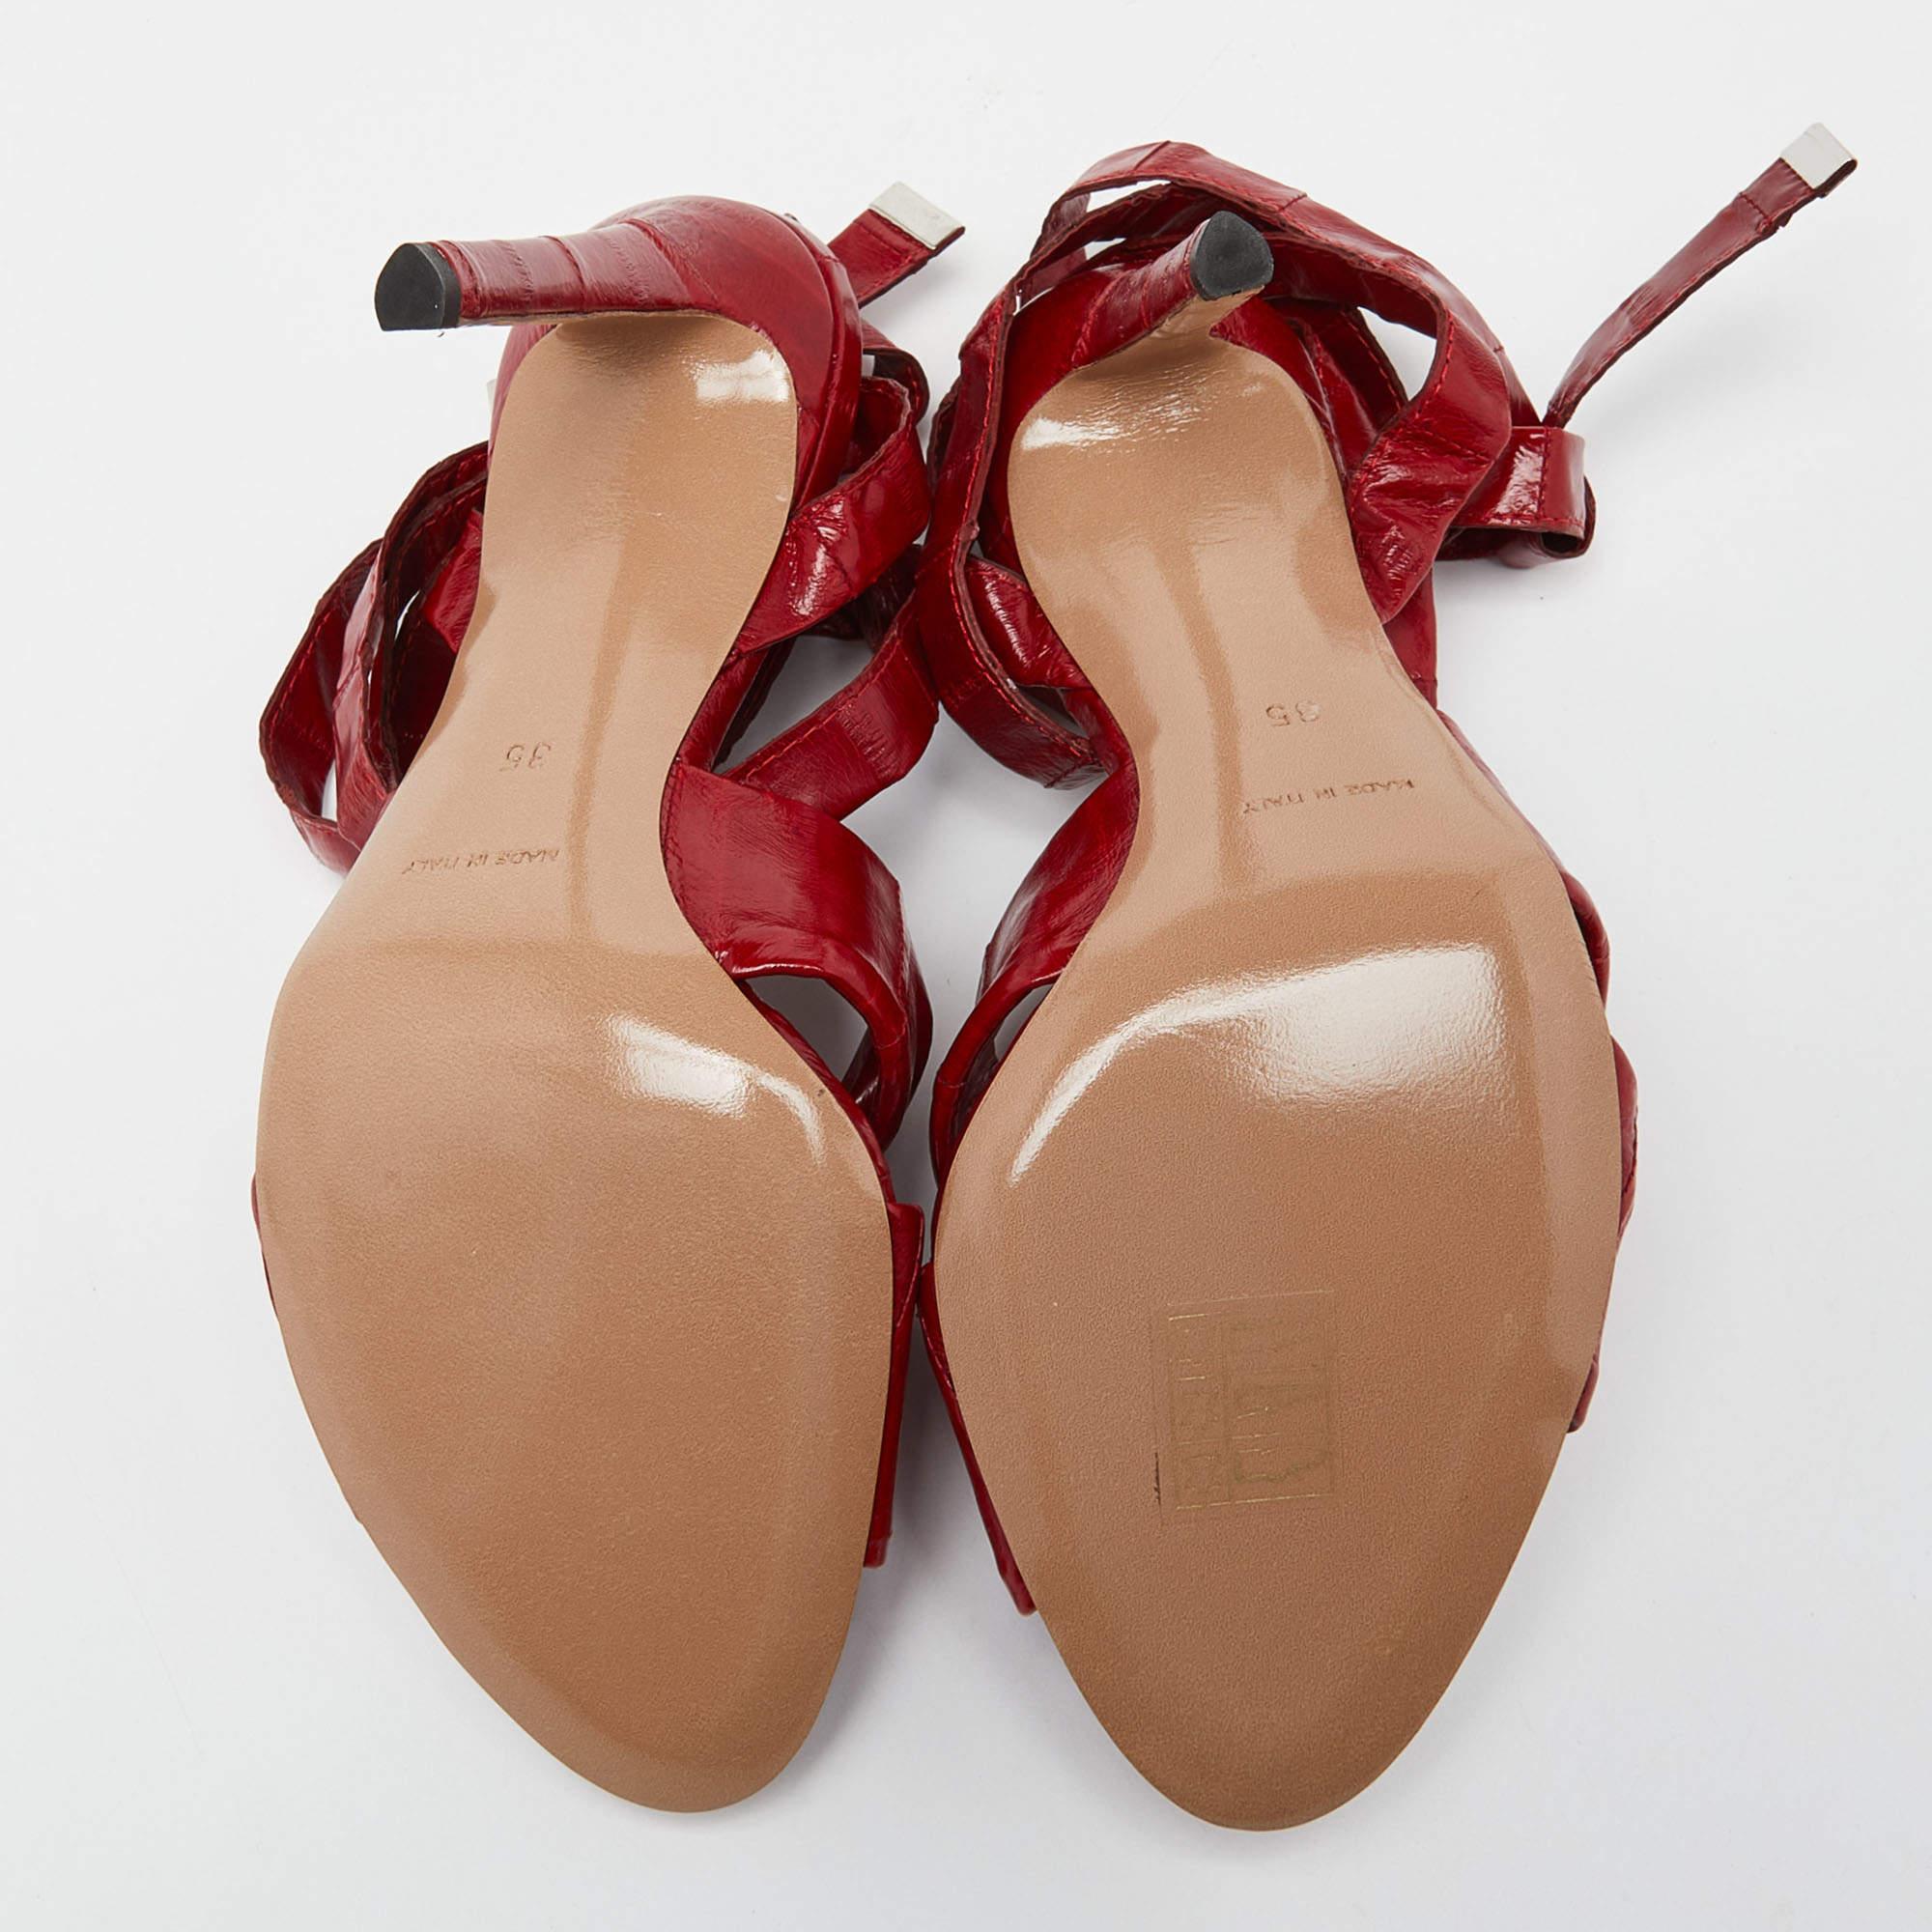 Altuzarra Red Eel Leather 'Zuni' Knotted Sandals Size 35 For Sale 3